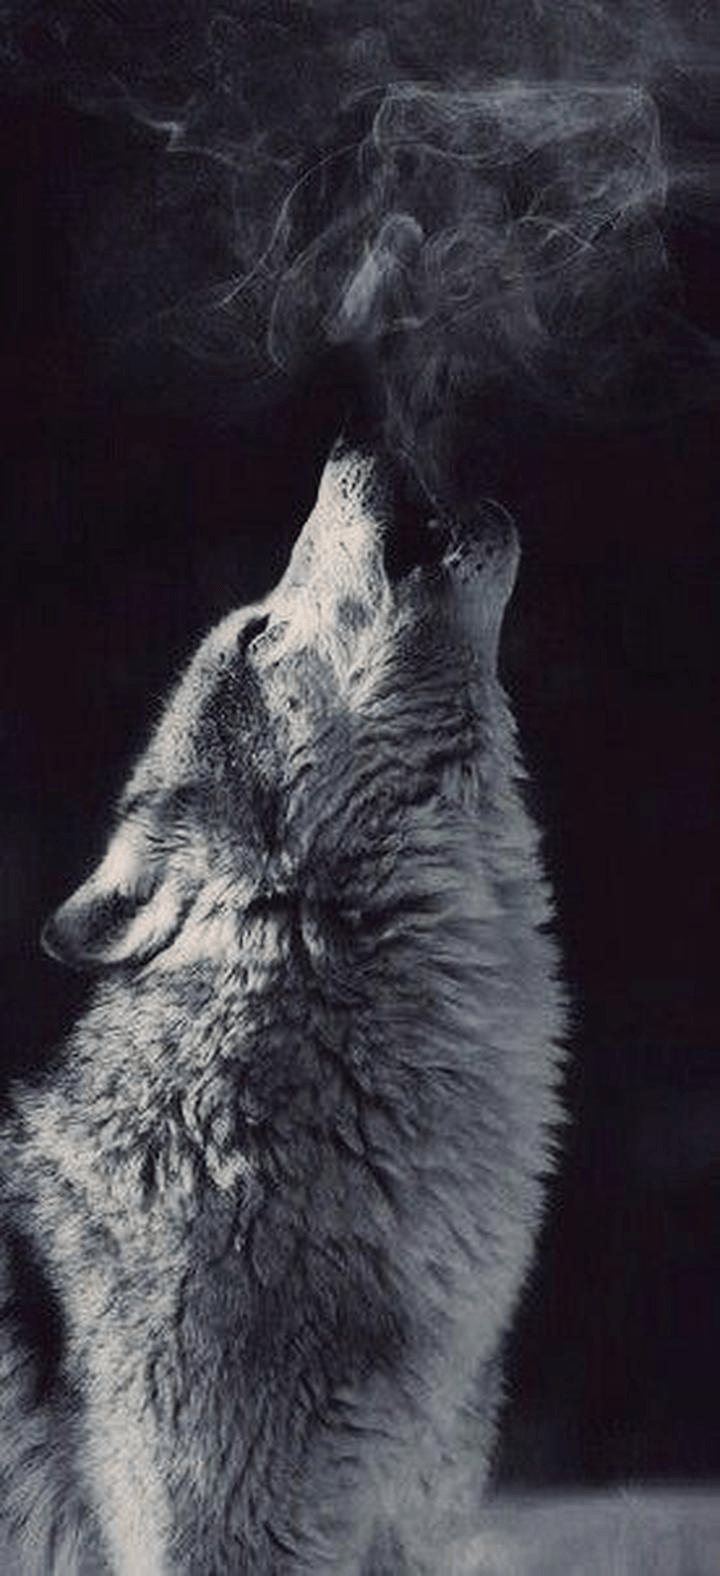 A black and white photo of an animal with smoke coming out - Wolf